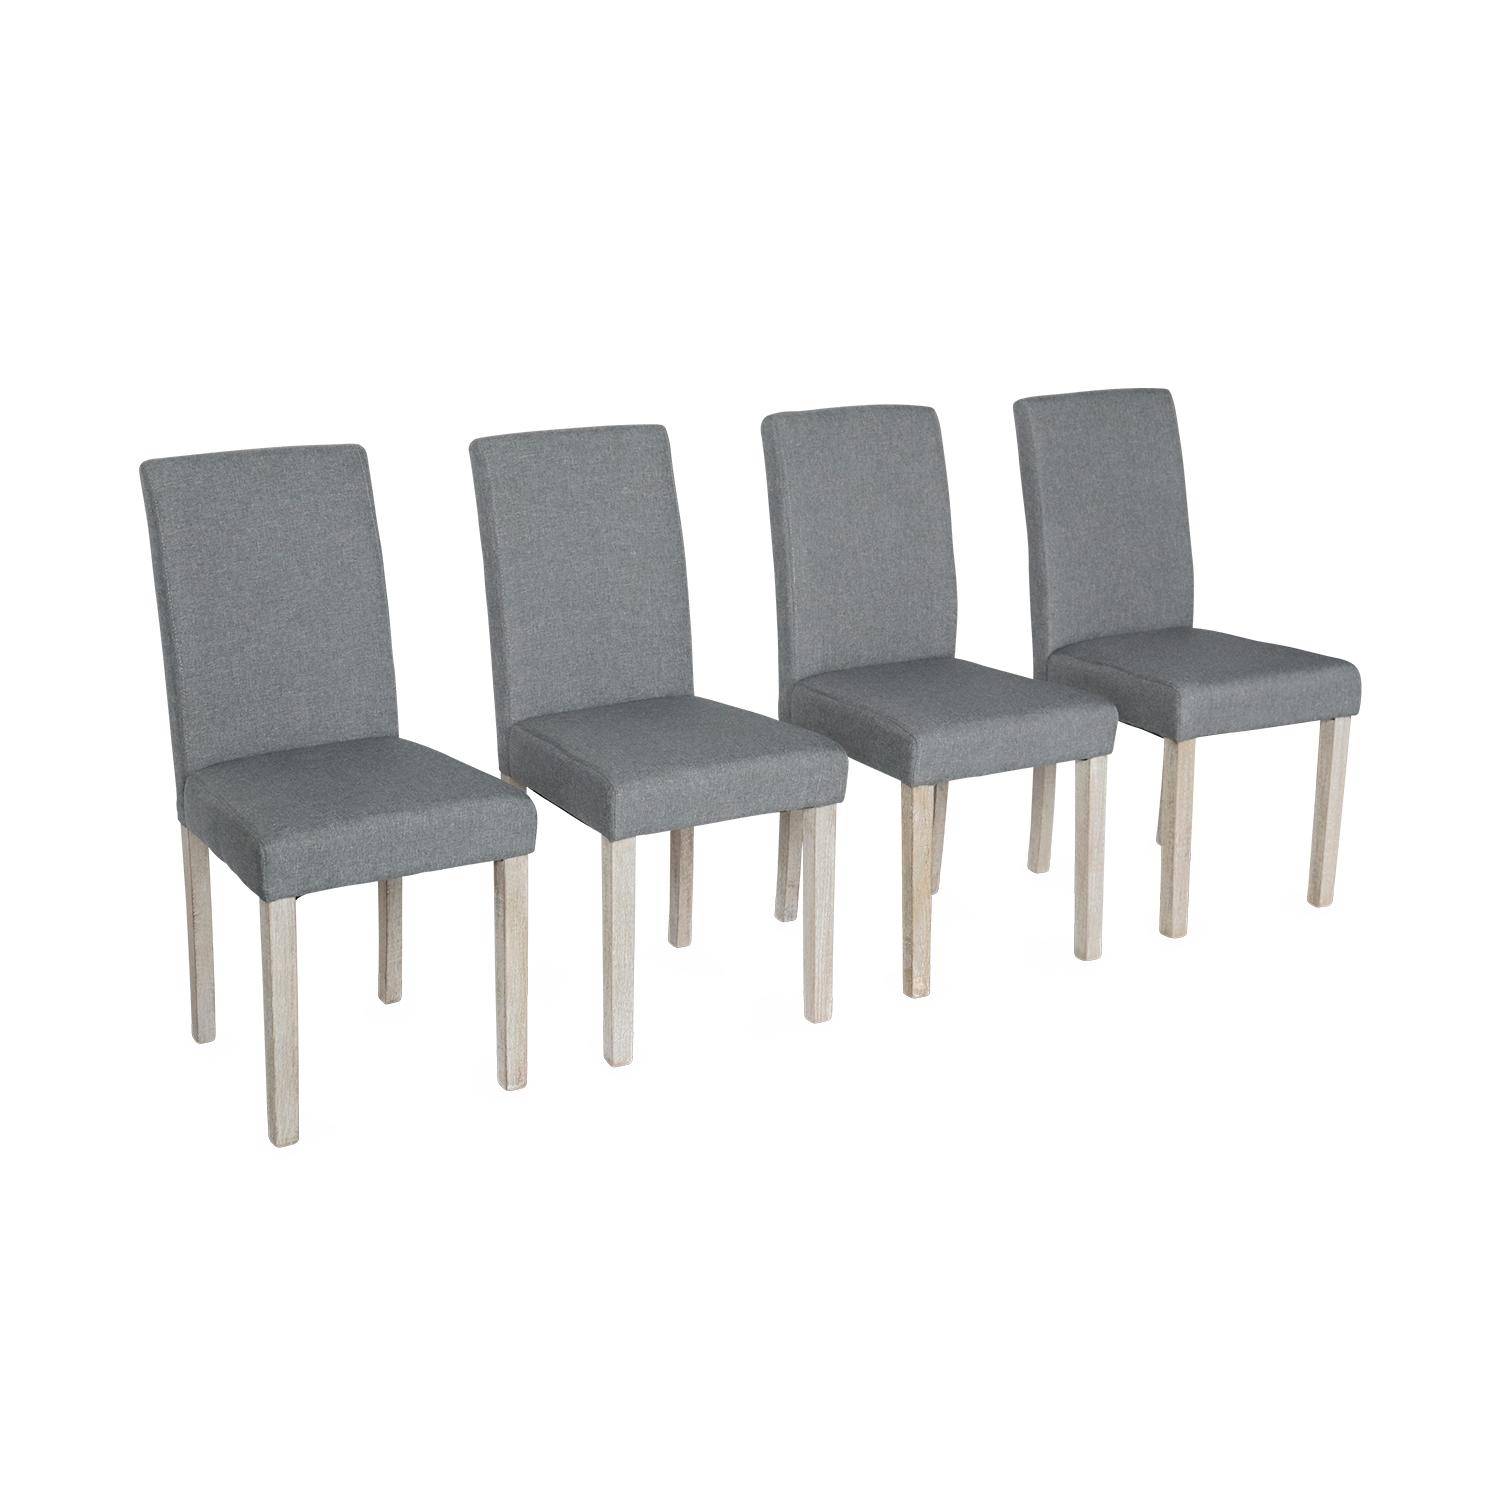 Set of 4 fabric dining chairs with wooden legs - Rita - Light grey Photo3